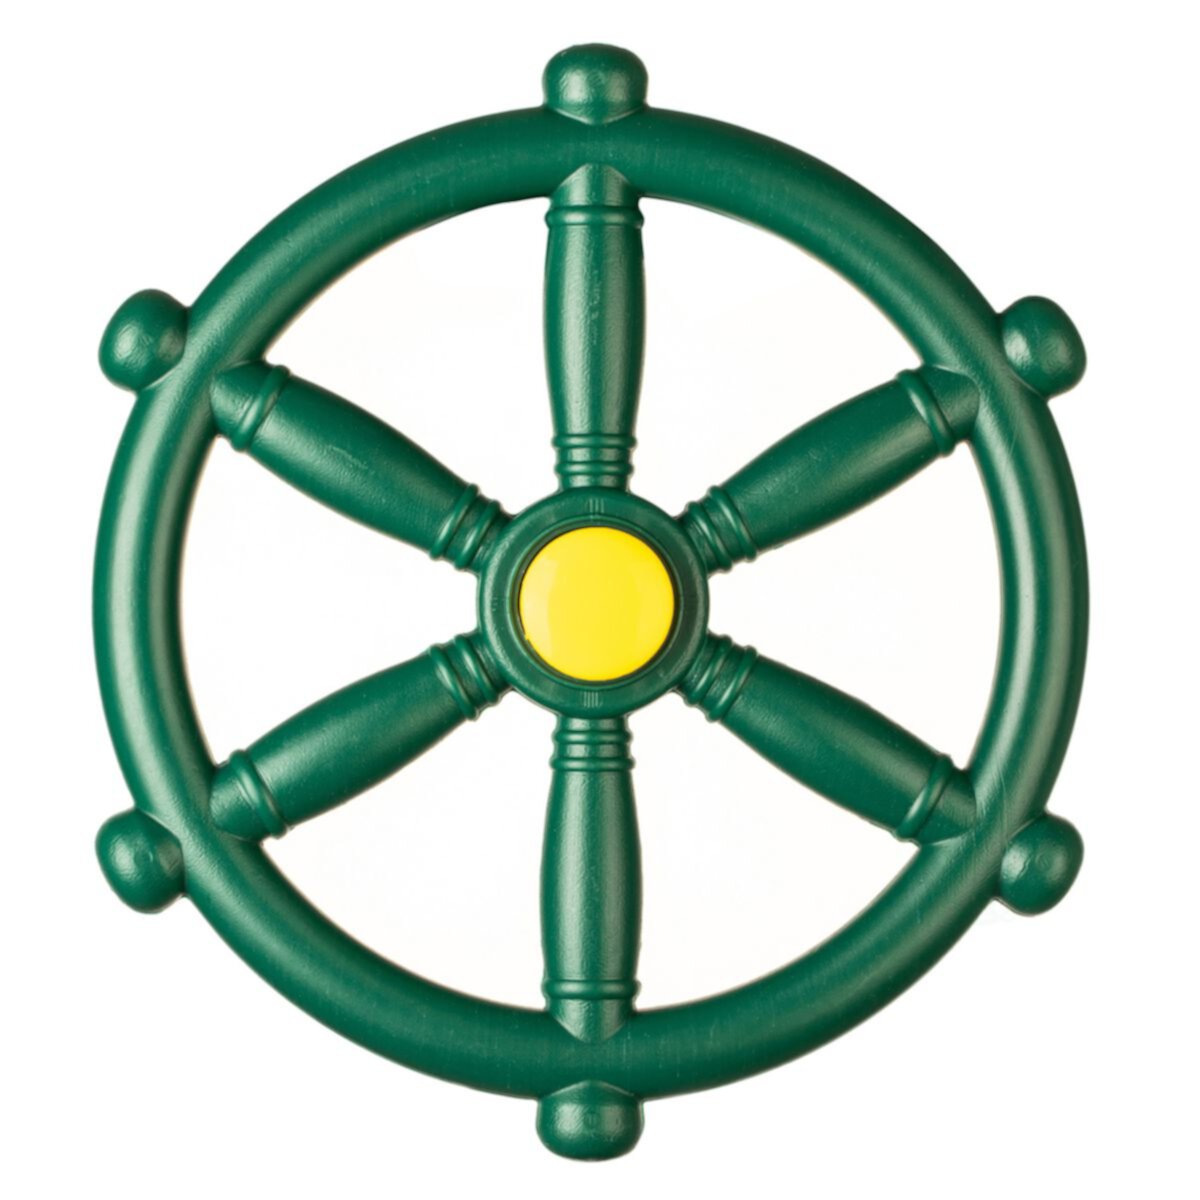 Green and Yellow Outdoor Playground Captain Pirate Ship Wheel, Playground Accessories Steering Wheel Playberg